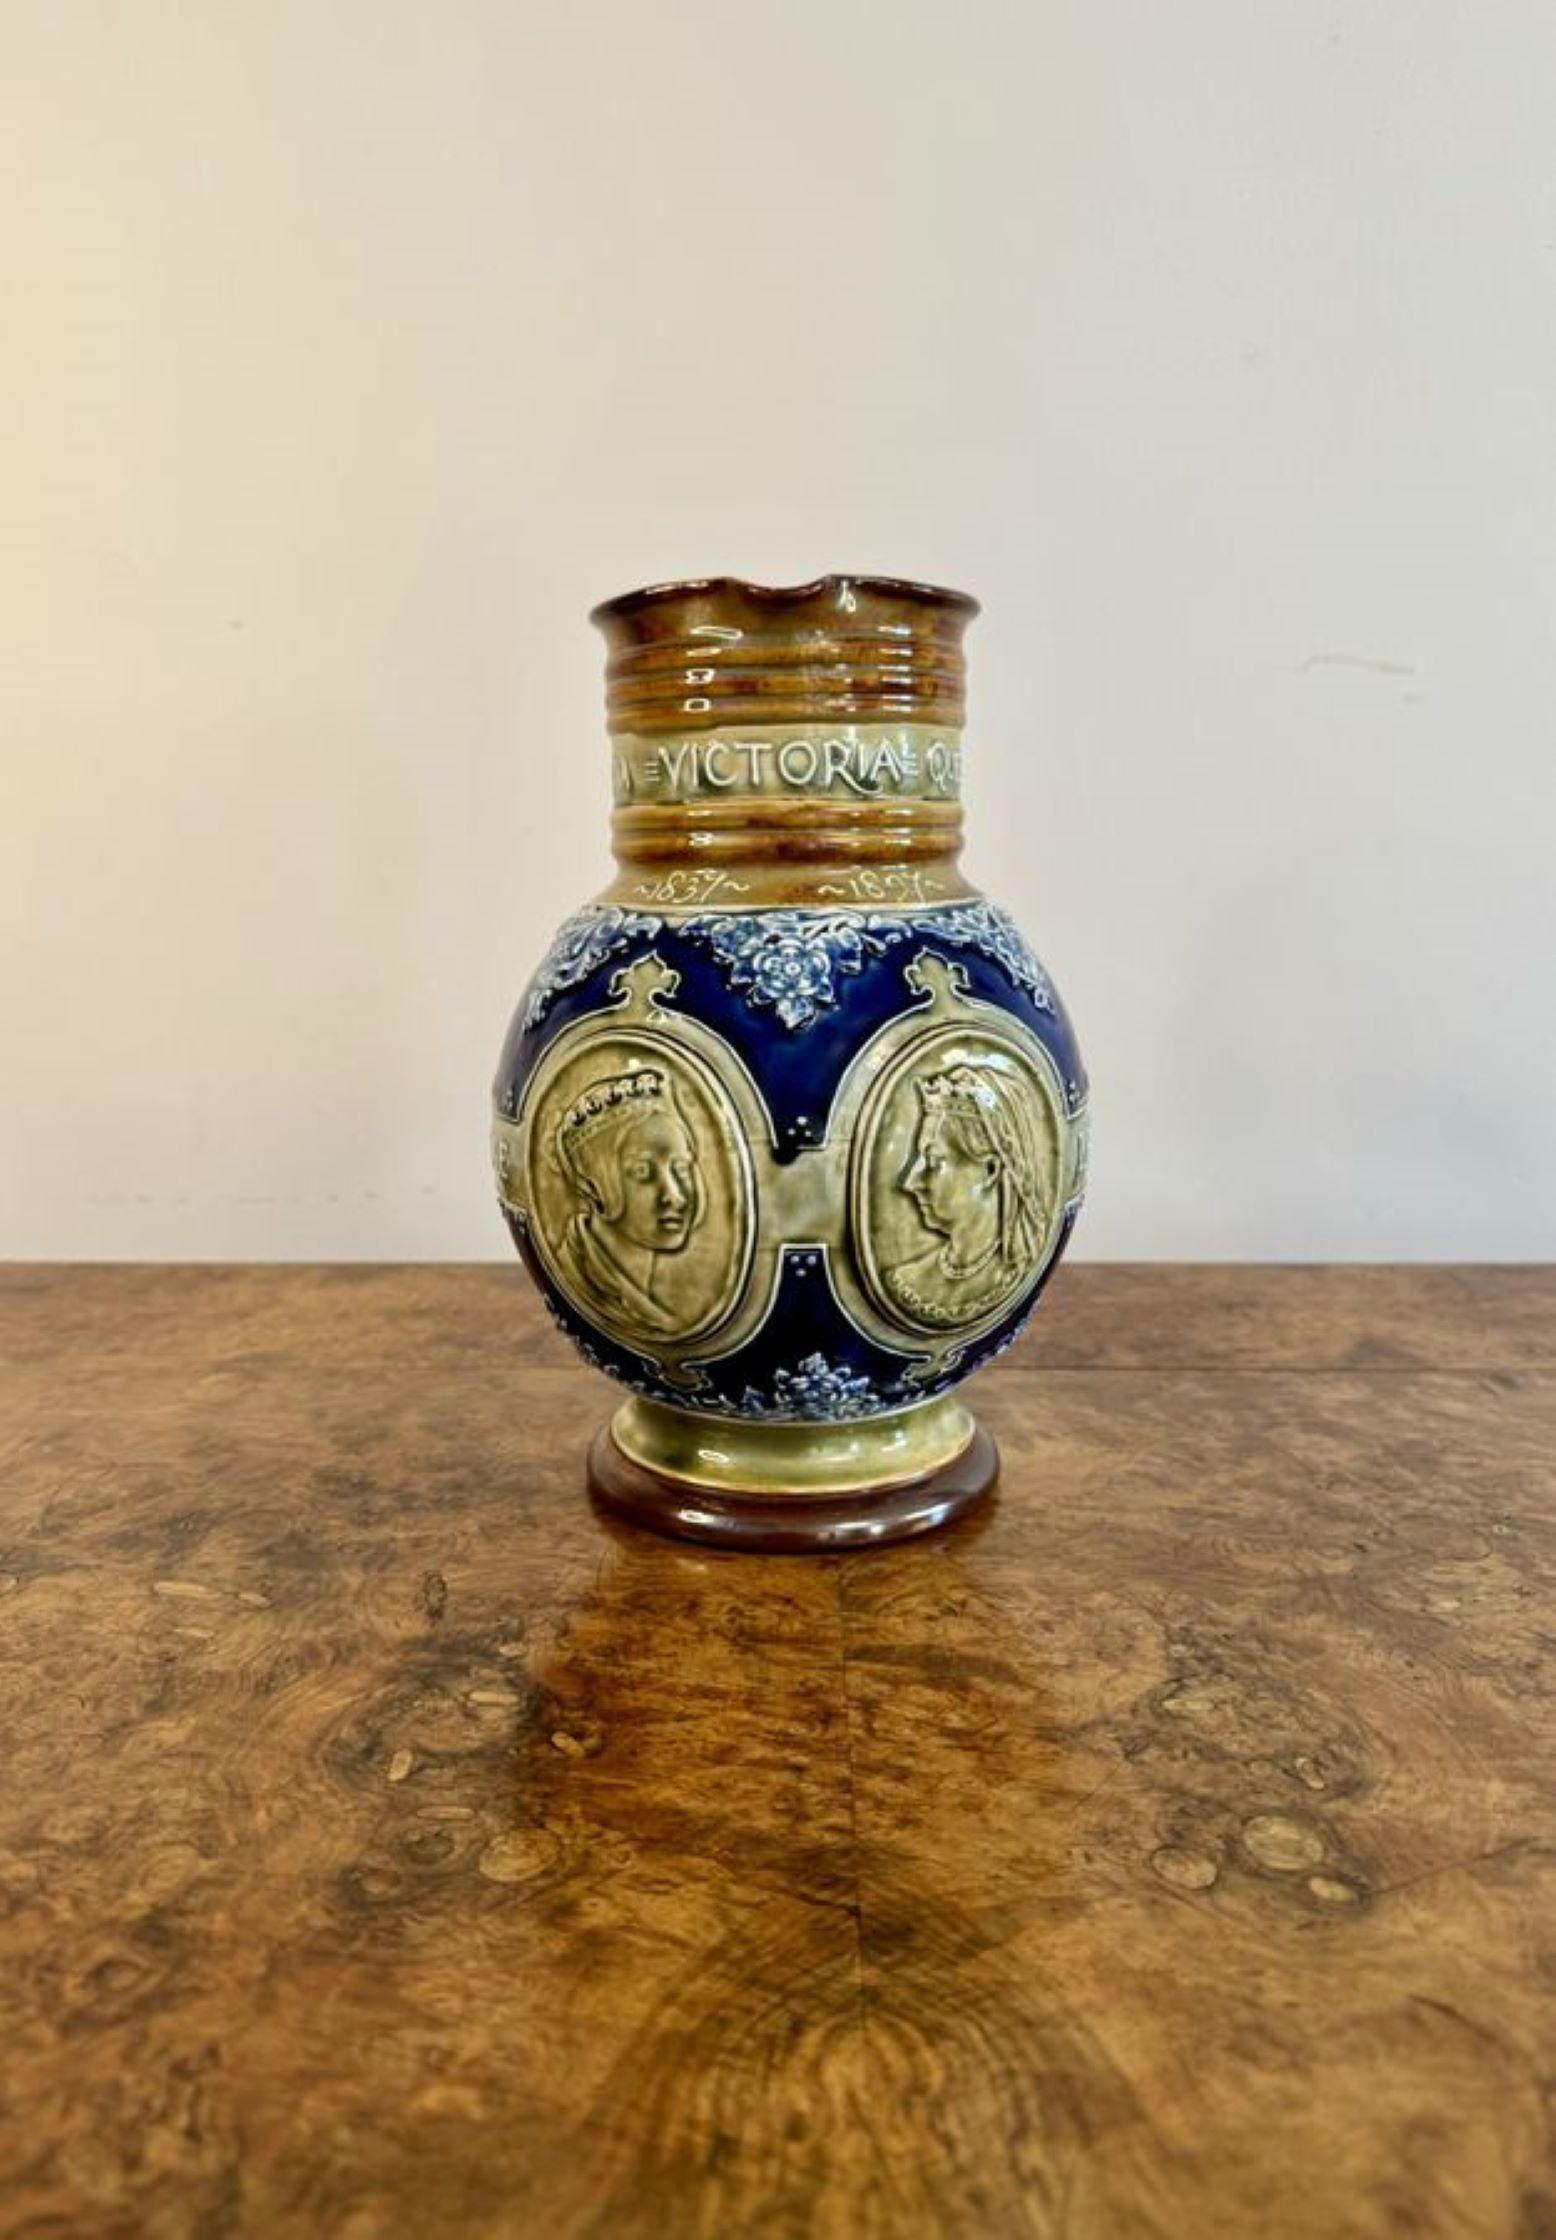 Quality antique Doulton Lambeth Queen Victoria jubilee jug, having a quality antique Victorian Doulton jubilee stoneware jug crafted to commemorate the Diamond Jubilee of the Queen Victoria in 1897 in stunning blue, green and brown colours. Stamped